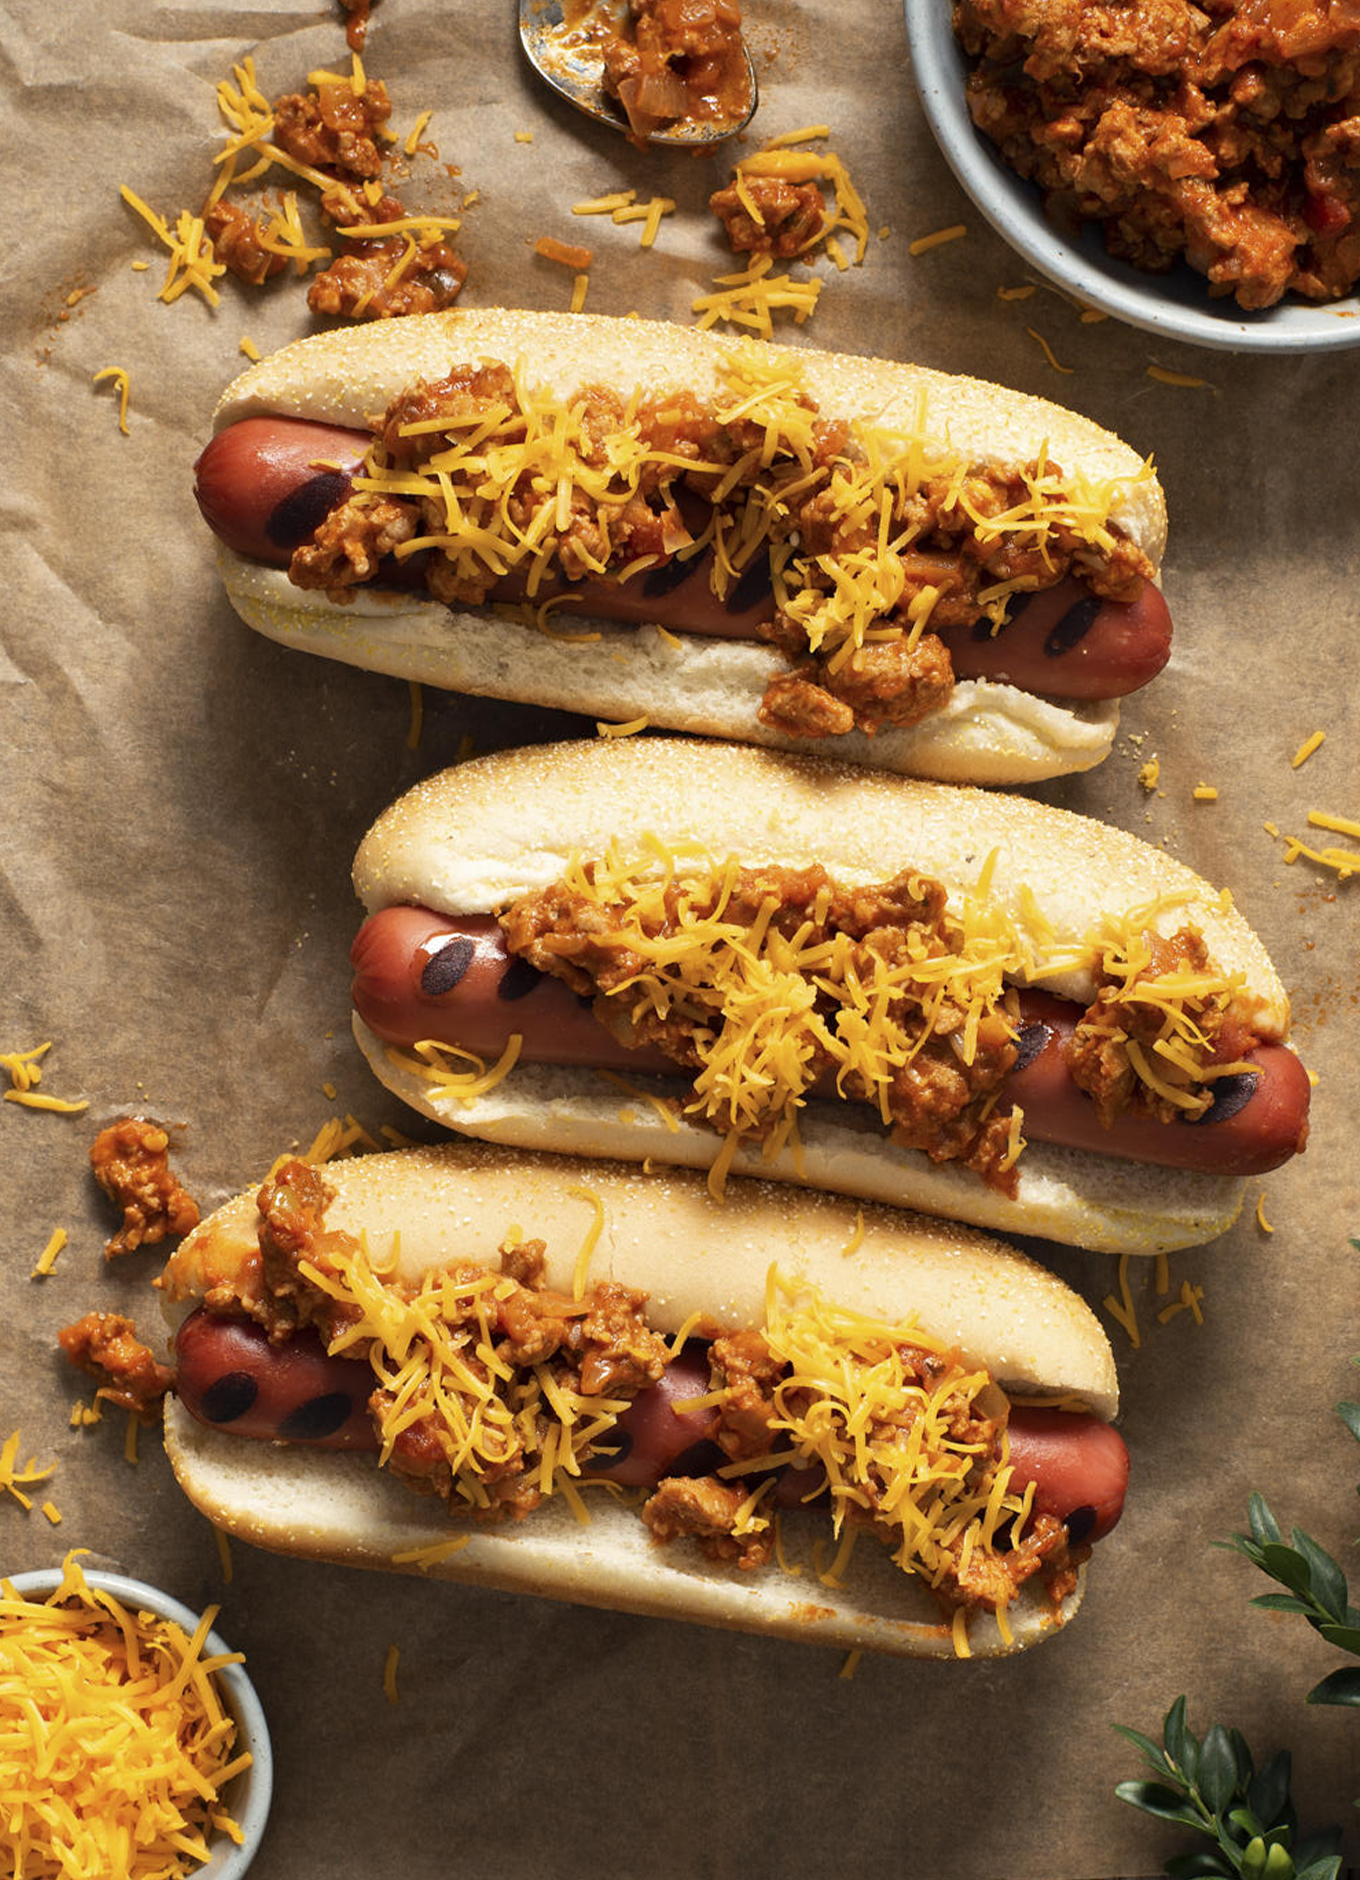 Three hot dogs in toasted buns topped with chili and melted cheese on a sheet of parchment paper, surrounded by ingredients